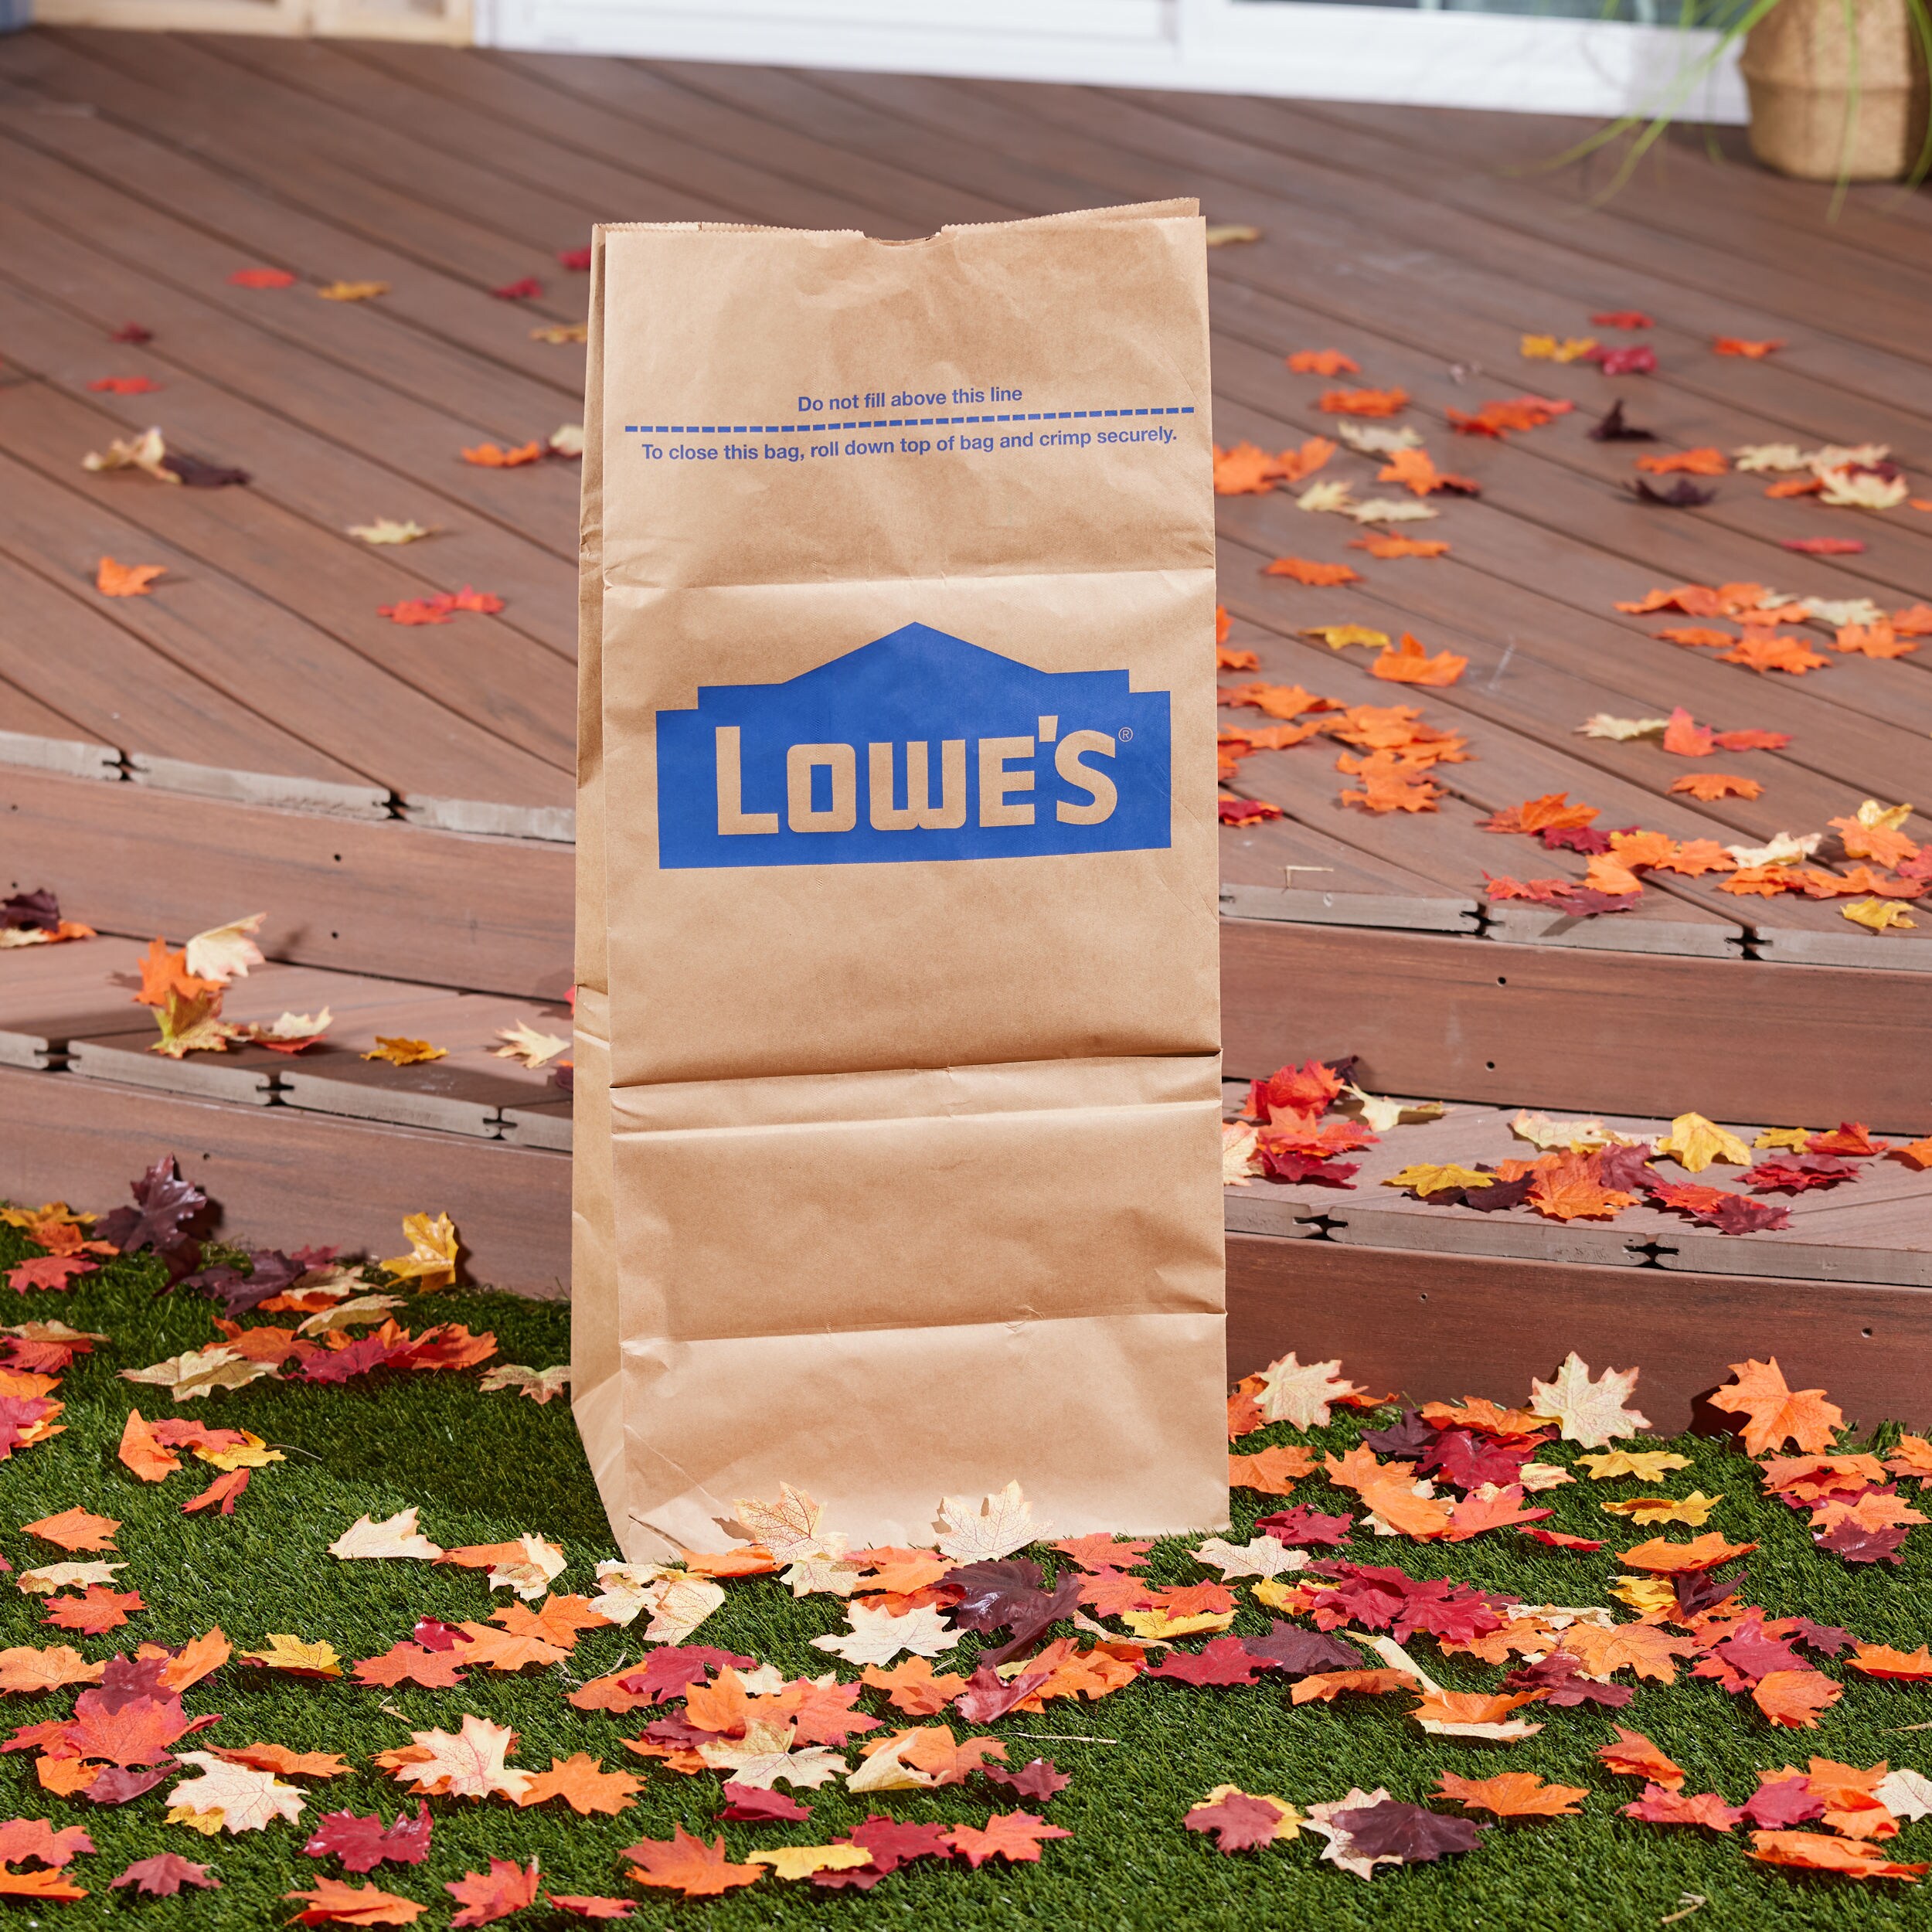 Lowe's Lawn Leaf Yard Trash Bags 10-Count 30-Gallon FREE PRIORITY SHIPPING 